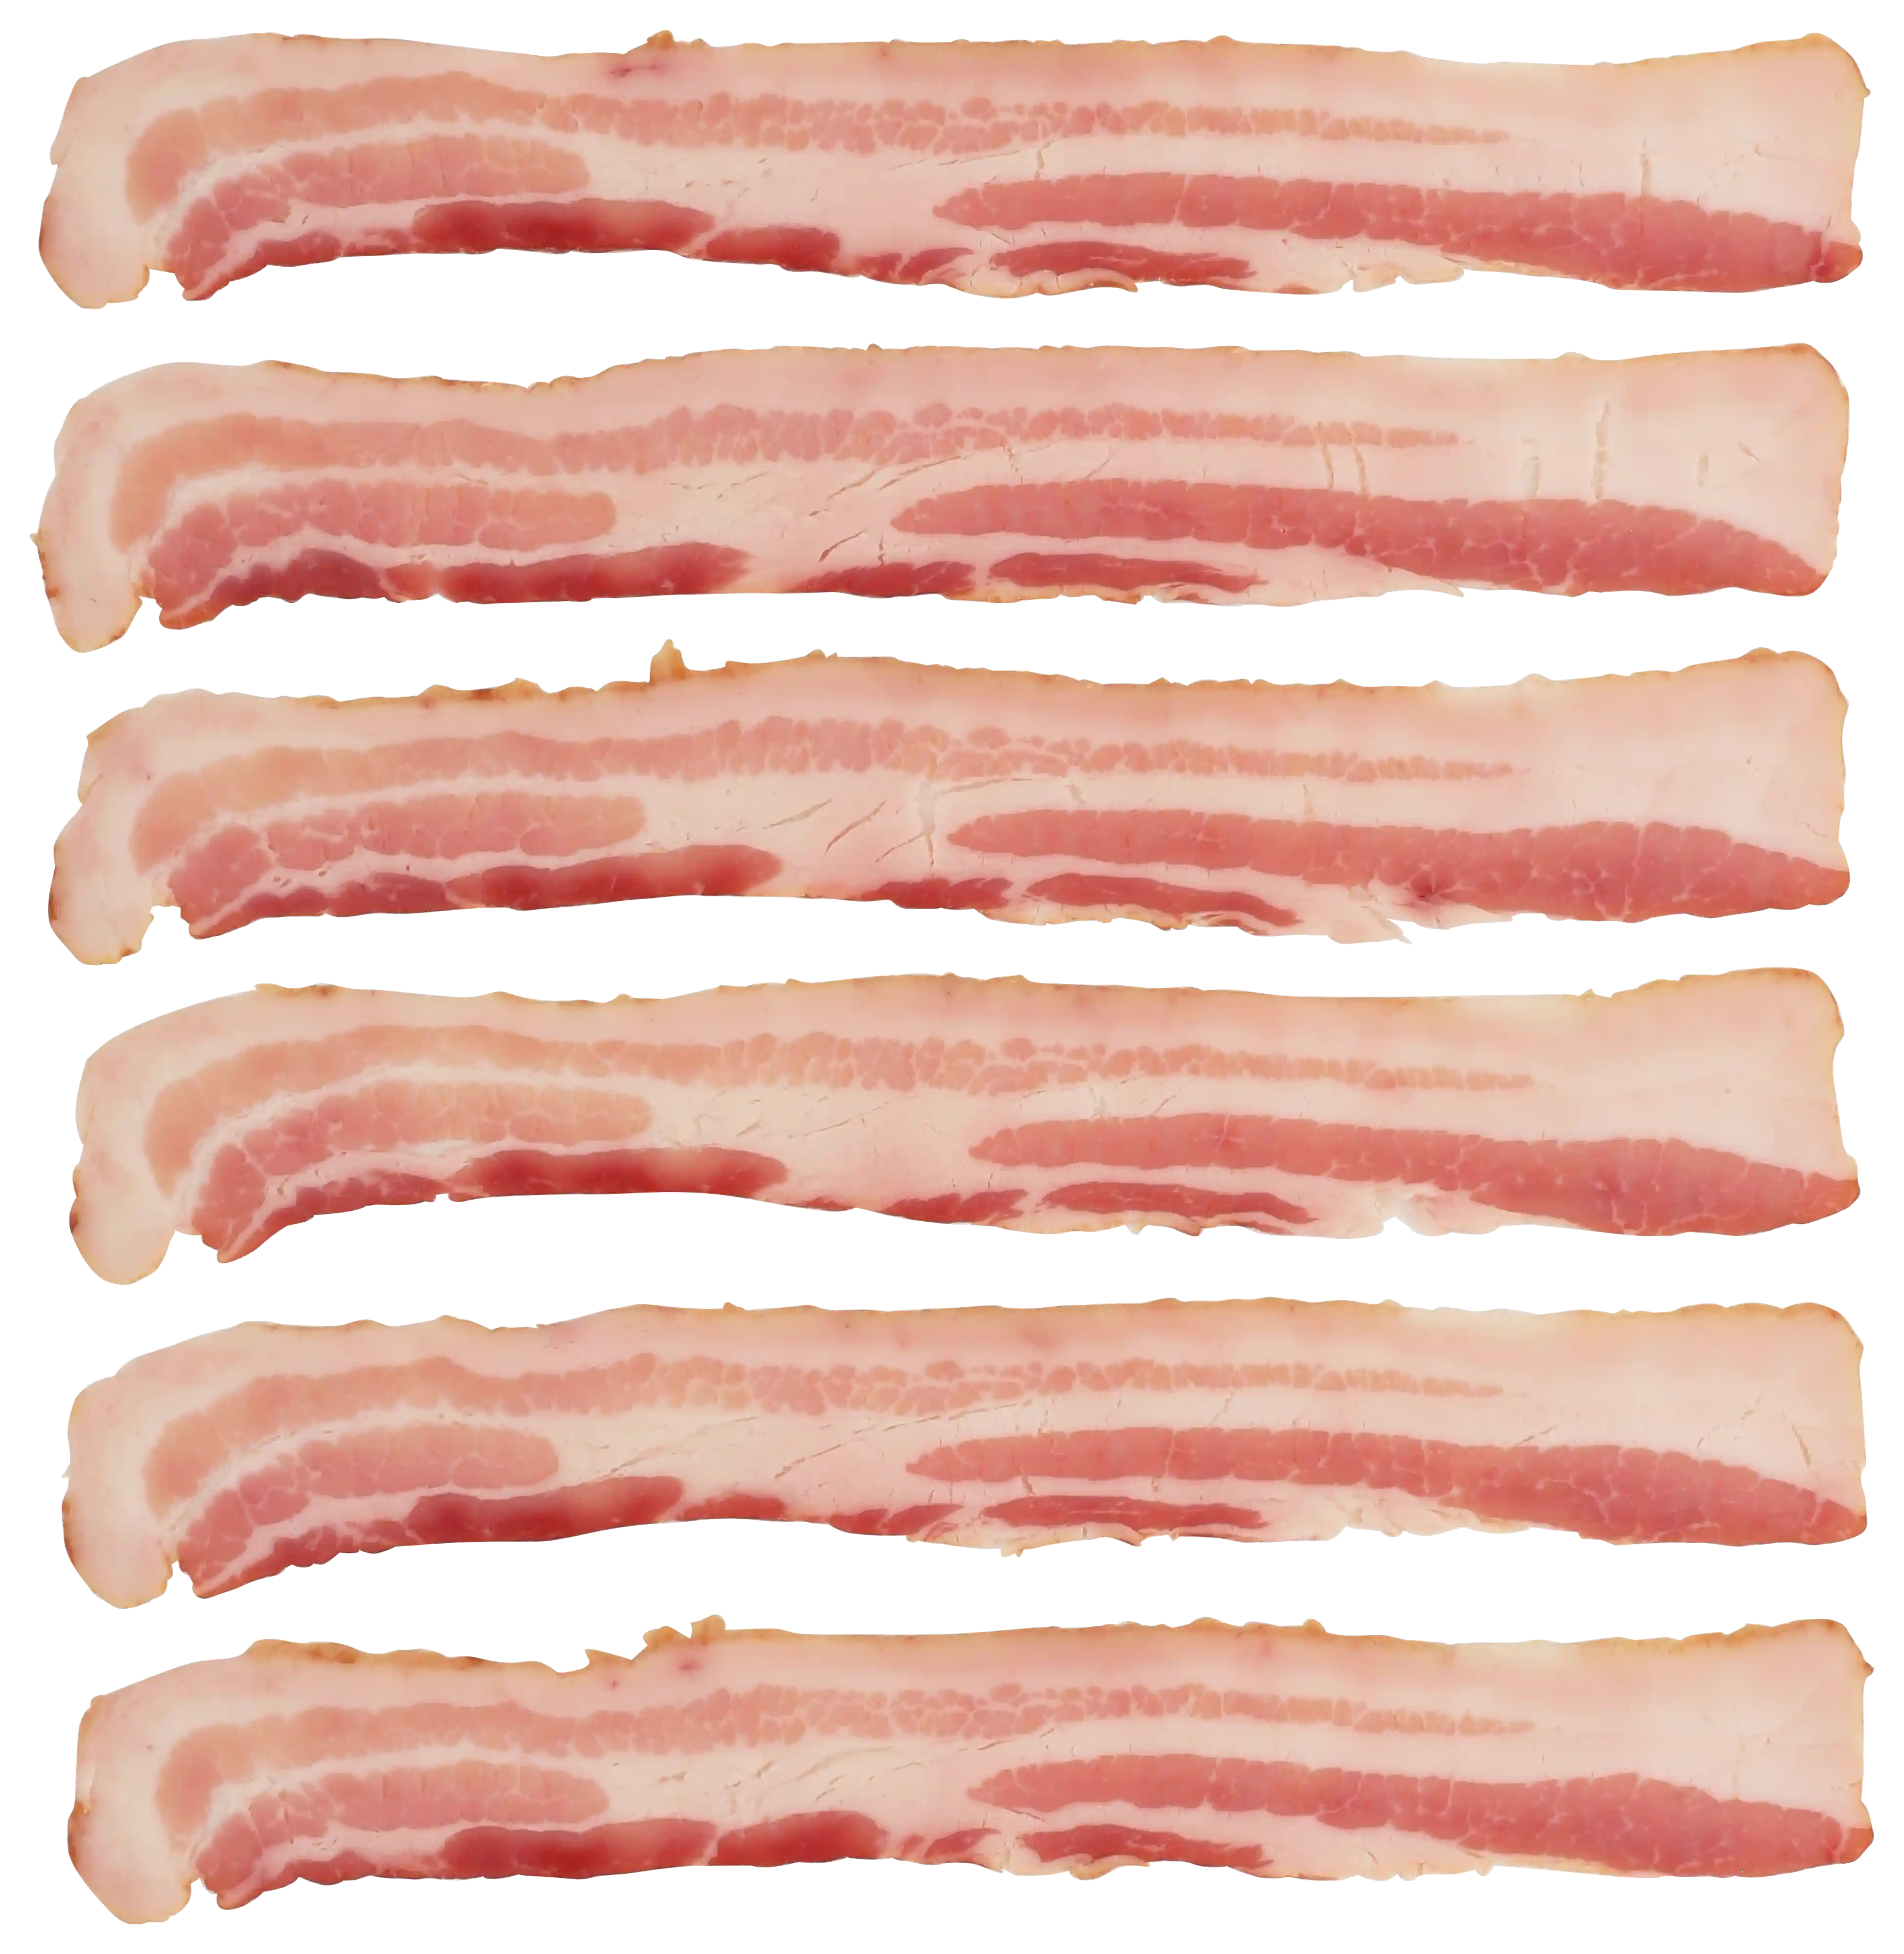 Wright® Brand Naturally Applewood Smoked Thin Sliced Bacon, Bulk, 15Lbs, 18-22 Slices per pound, Gas Flushed_image_21